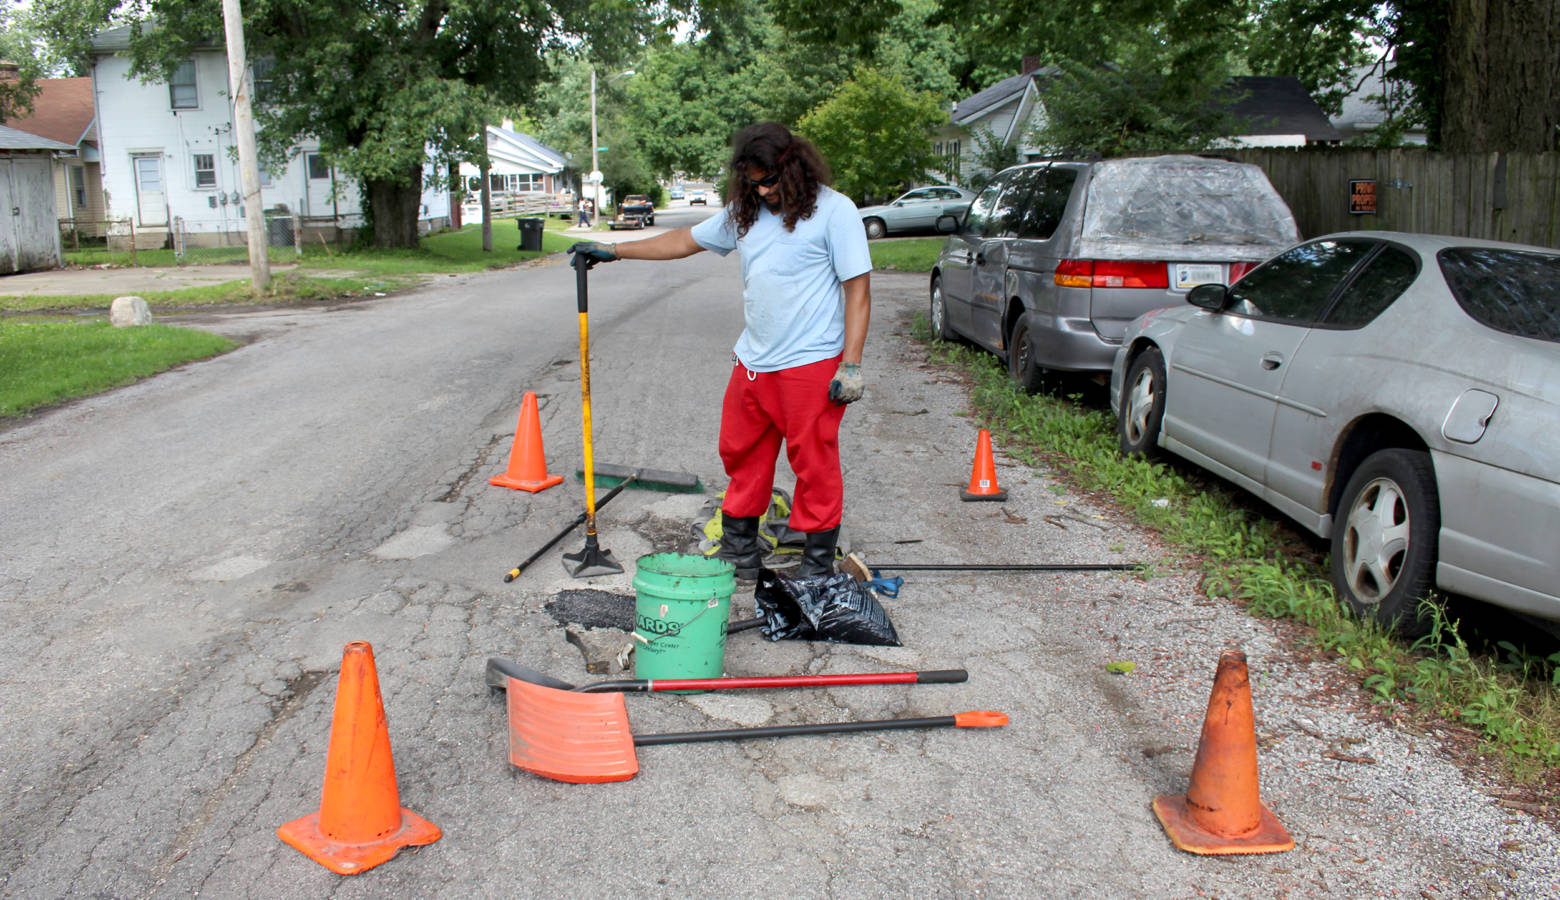 Michael Warren has spent about $400 out-of-pocket this summer to fill potholes in his Indianapolis neighborhood. (Annie Ropeik/IPB News)